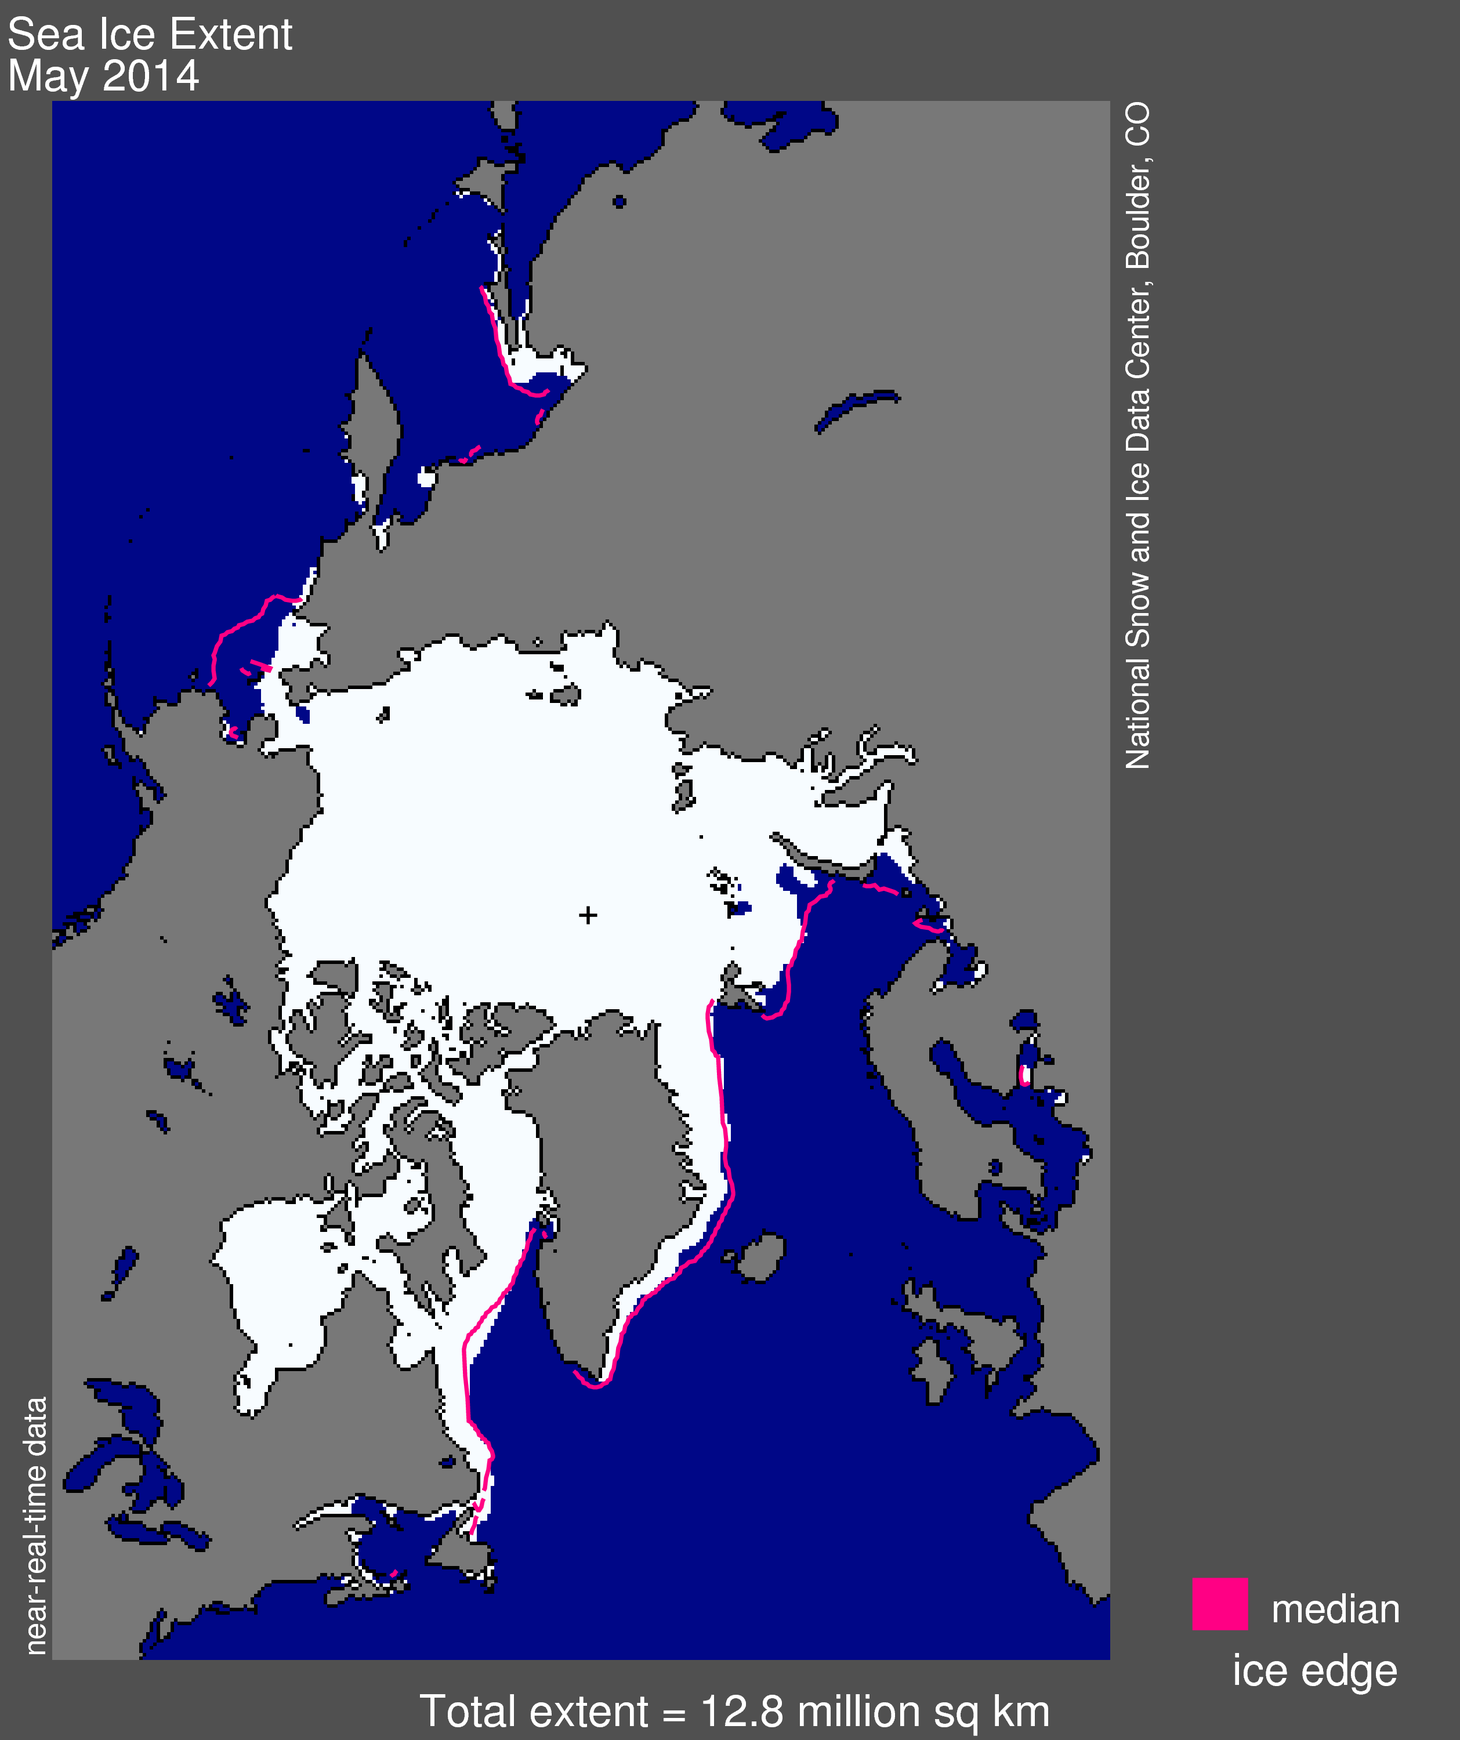 Arctic Sea Ice extent may 2014